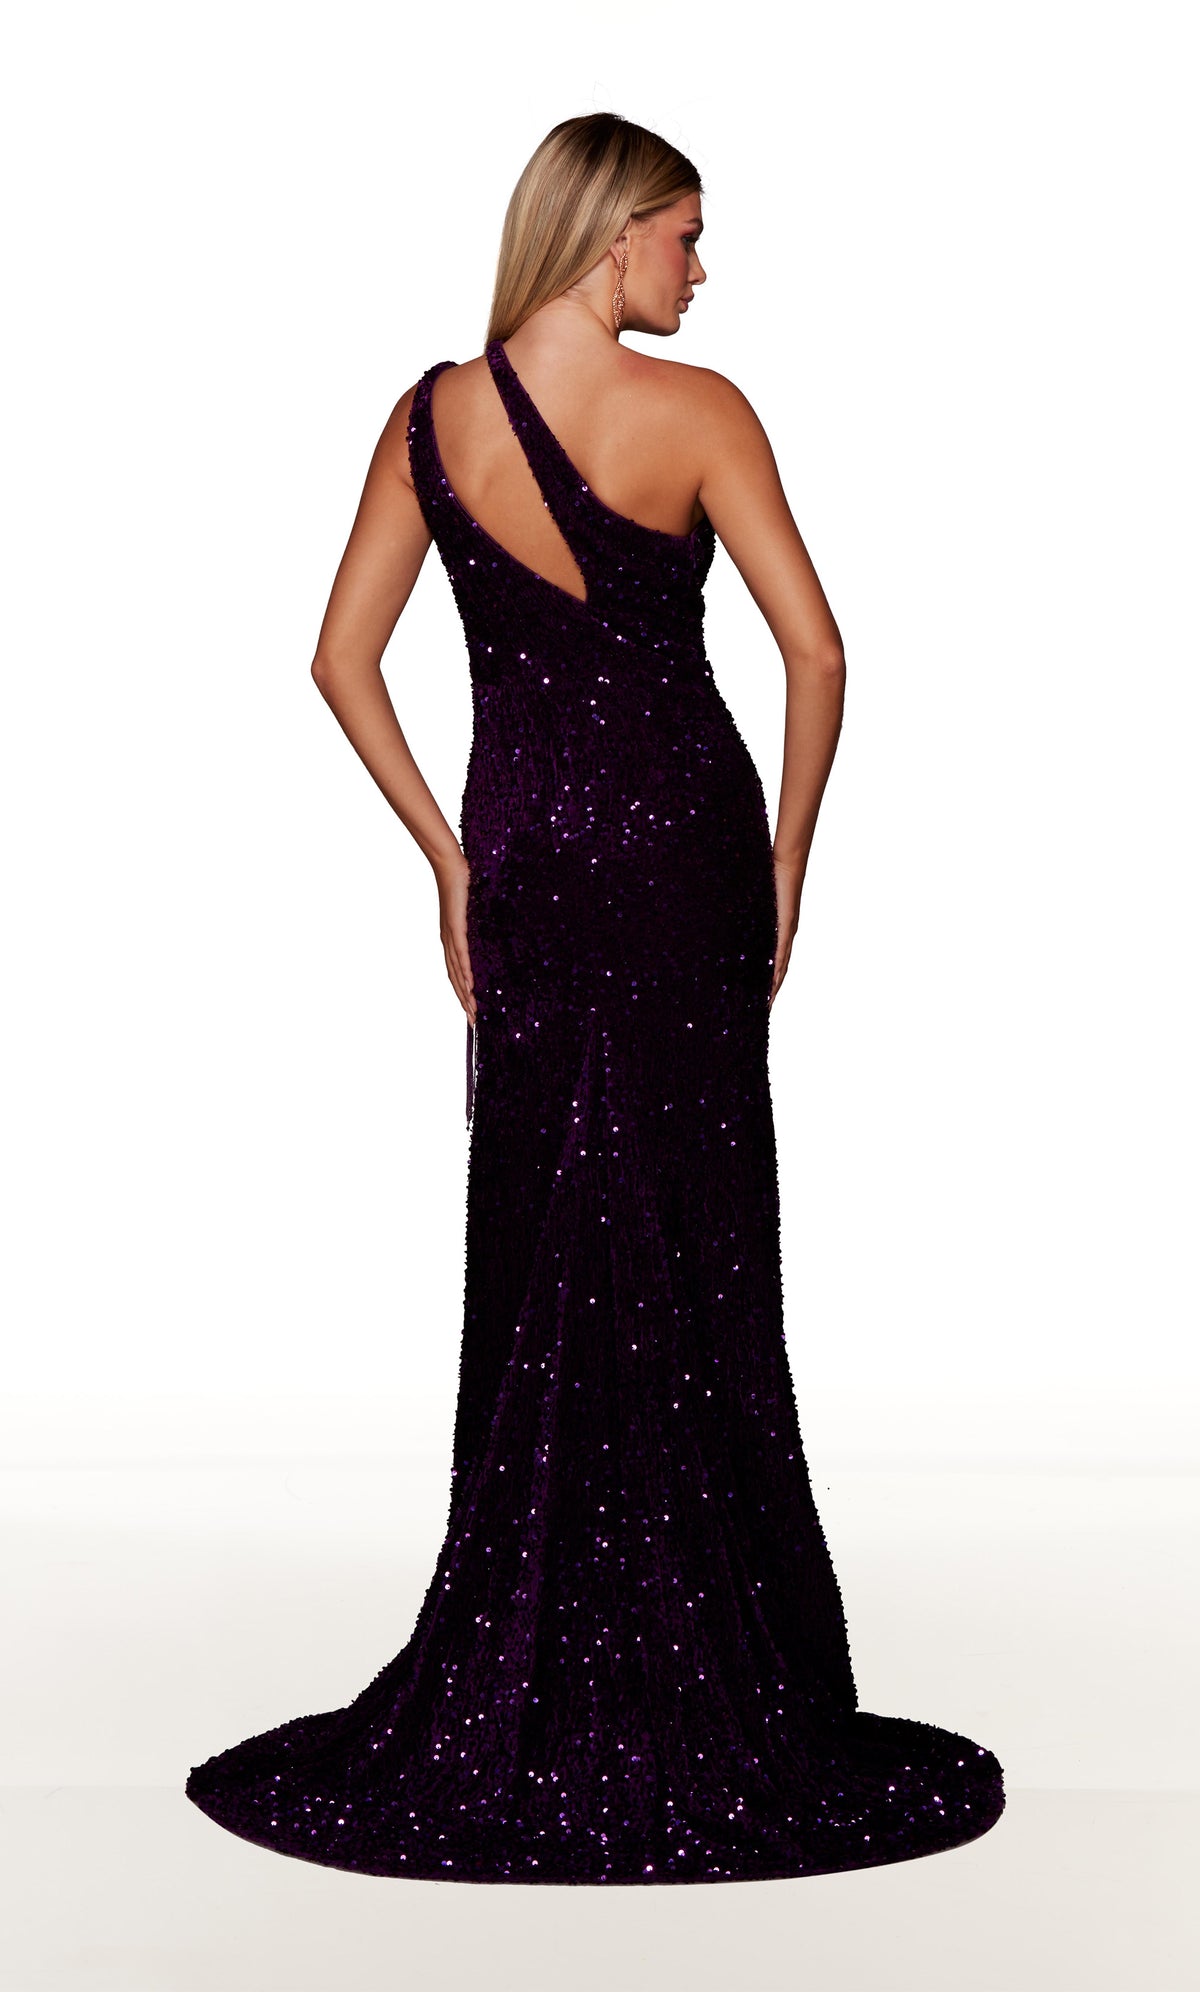 Purple one shoulder prom dress with cutout, high slit with fringe detail, and train.